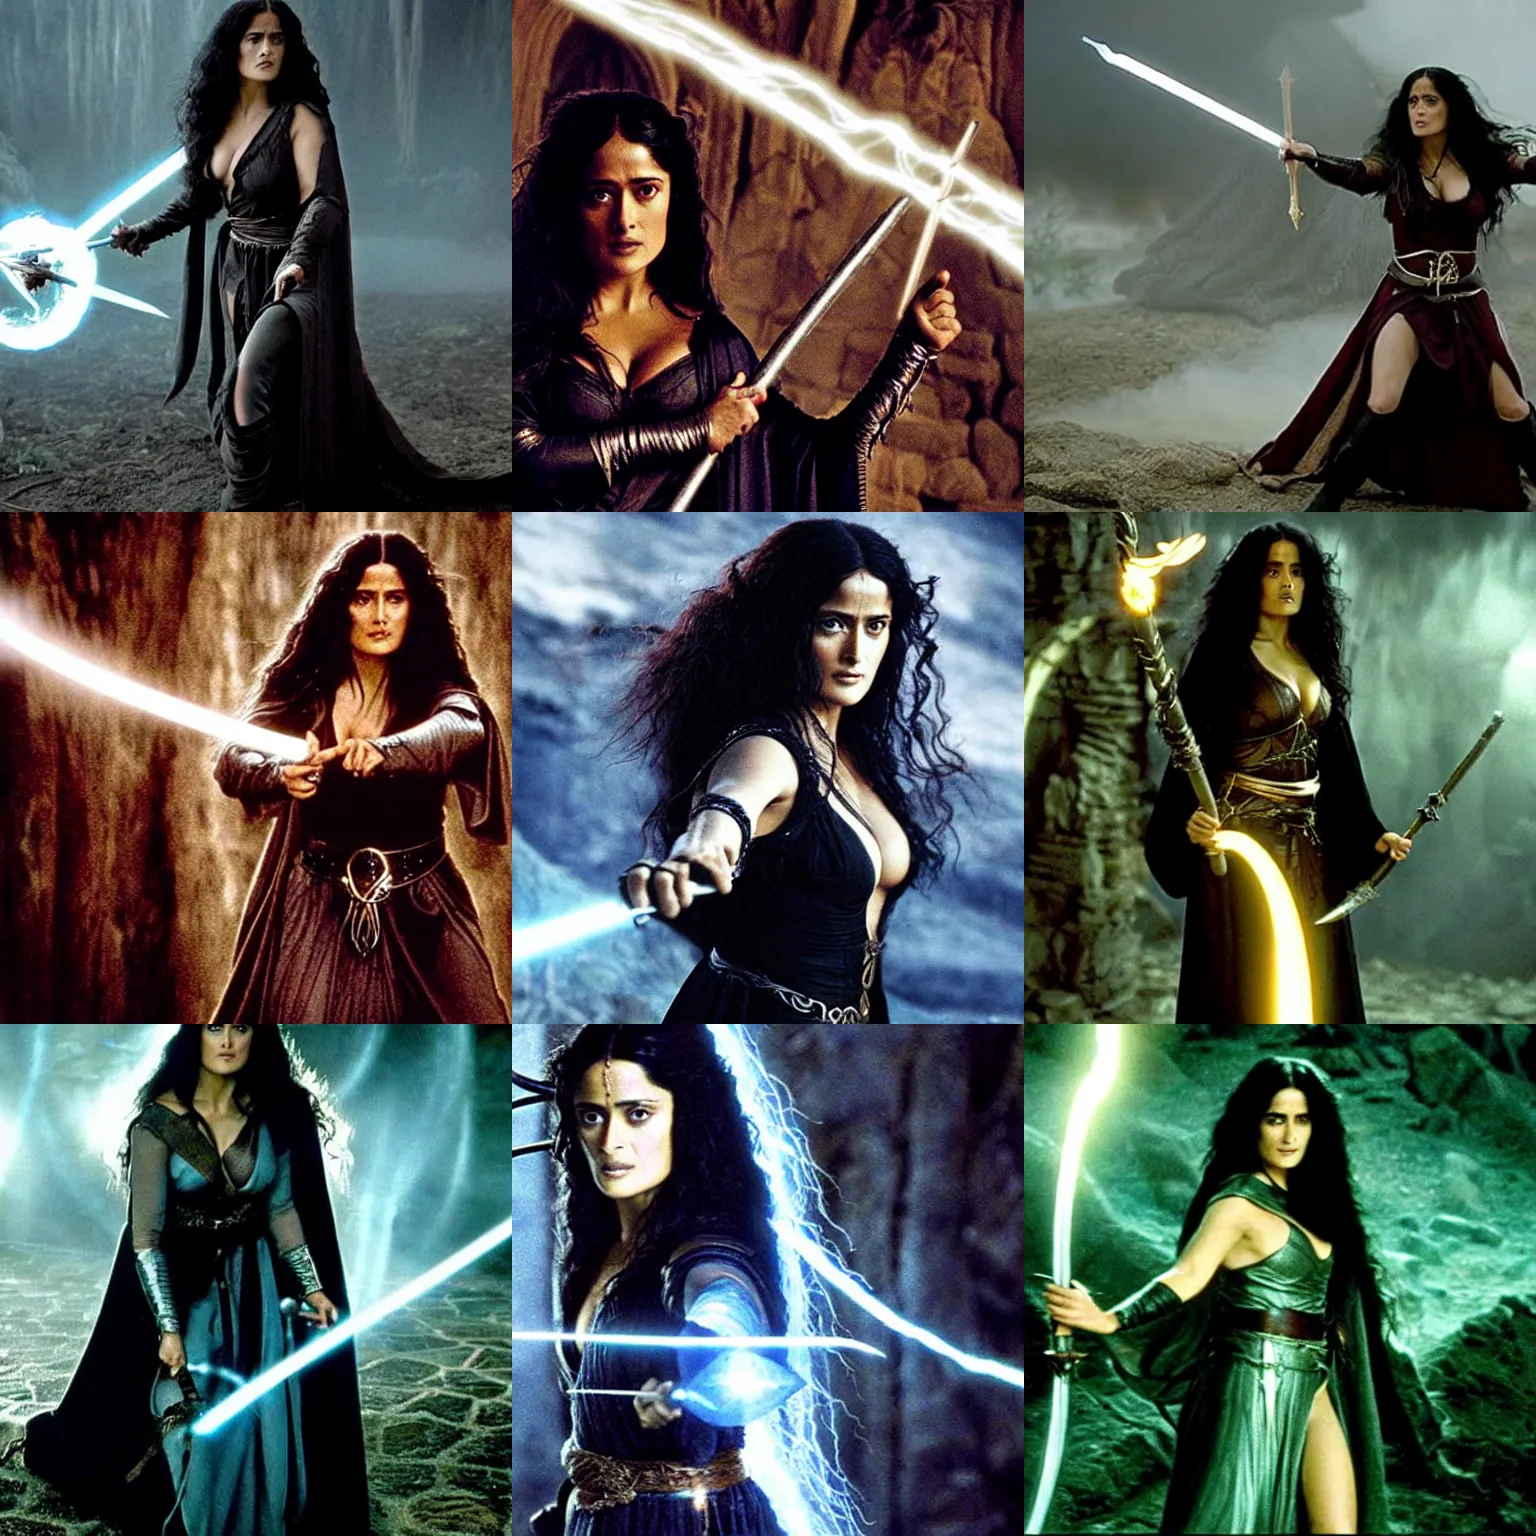 Prompt: epic photo of salma hayek as beautiful medieval sorceress with very long black hair wearing a black satin robe and metal belt, battle scene, holding her wizard staff electricity emanating from it, sweaty, in the film lord of the rings, movie still, cinematography by david fincher